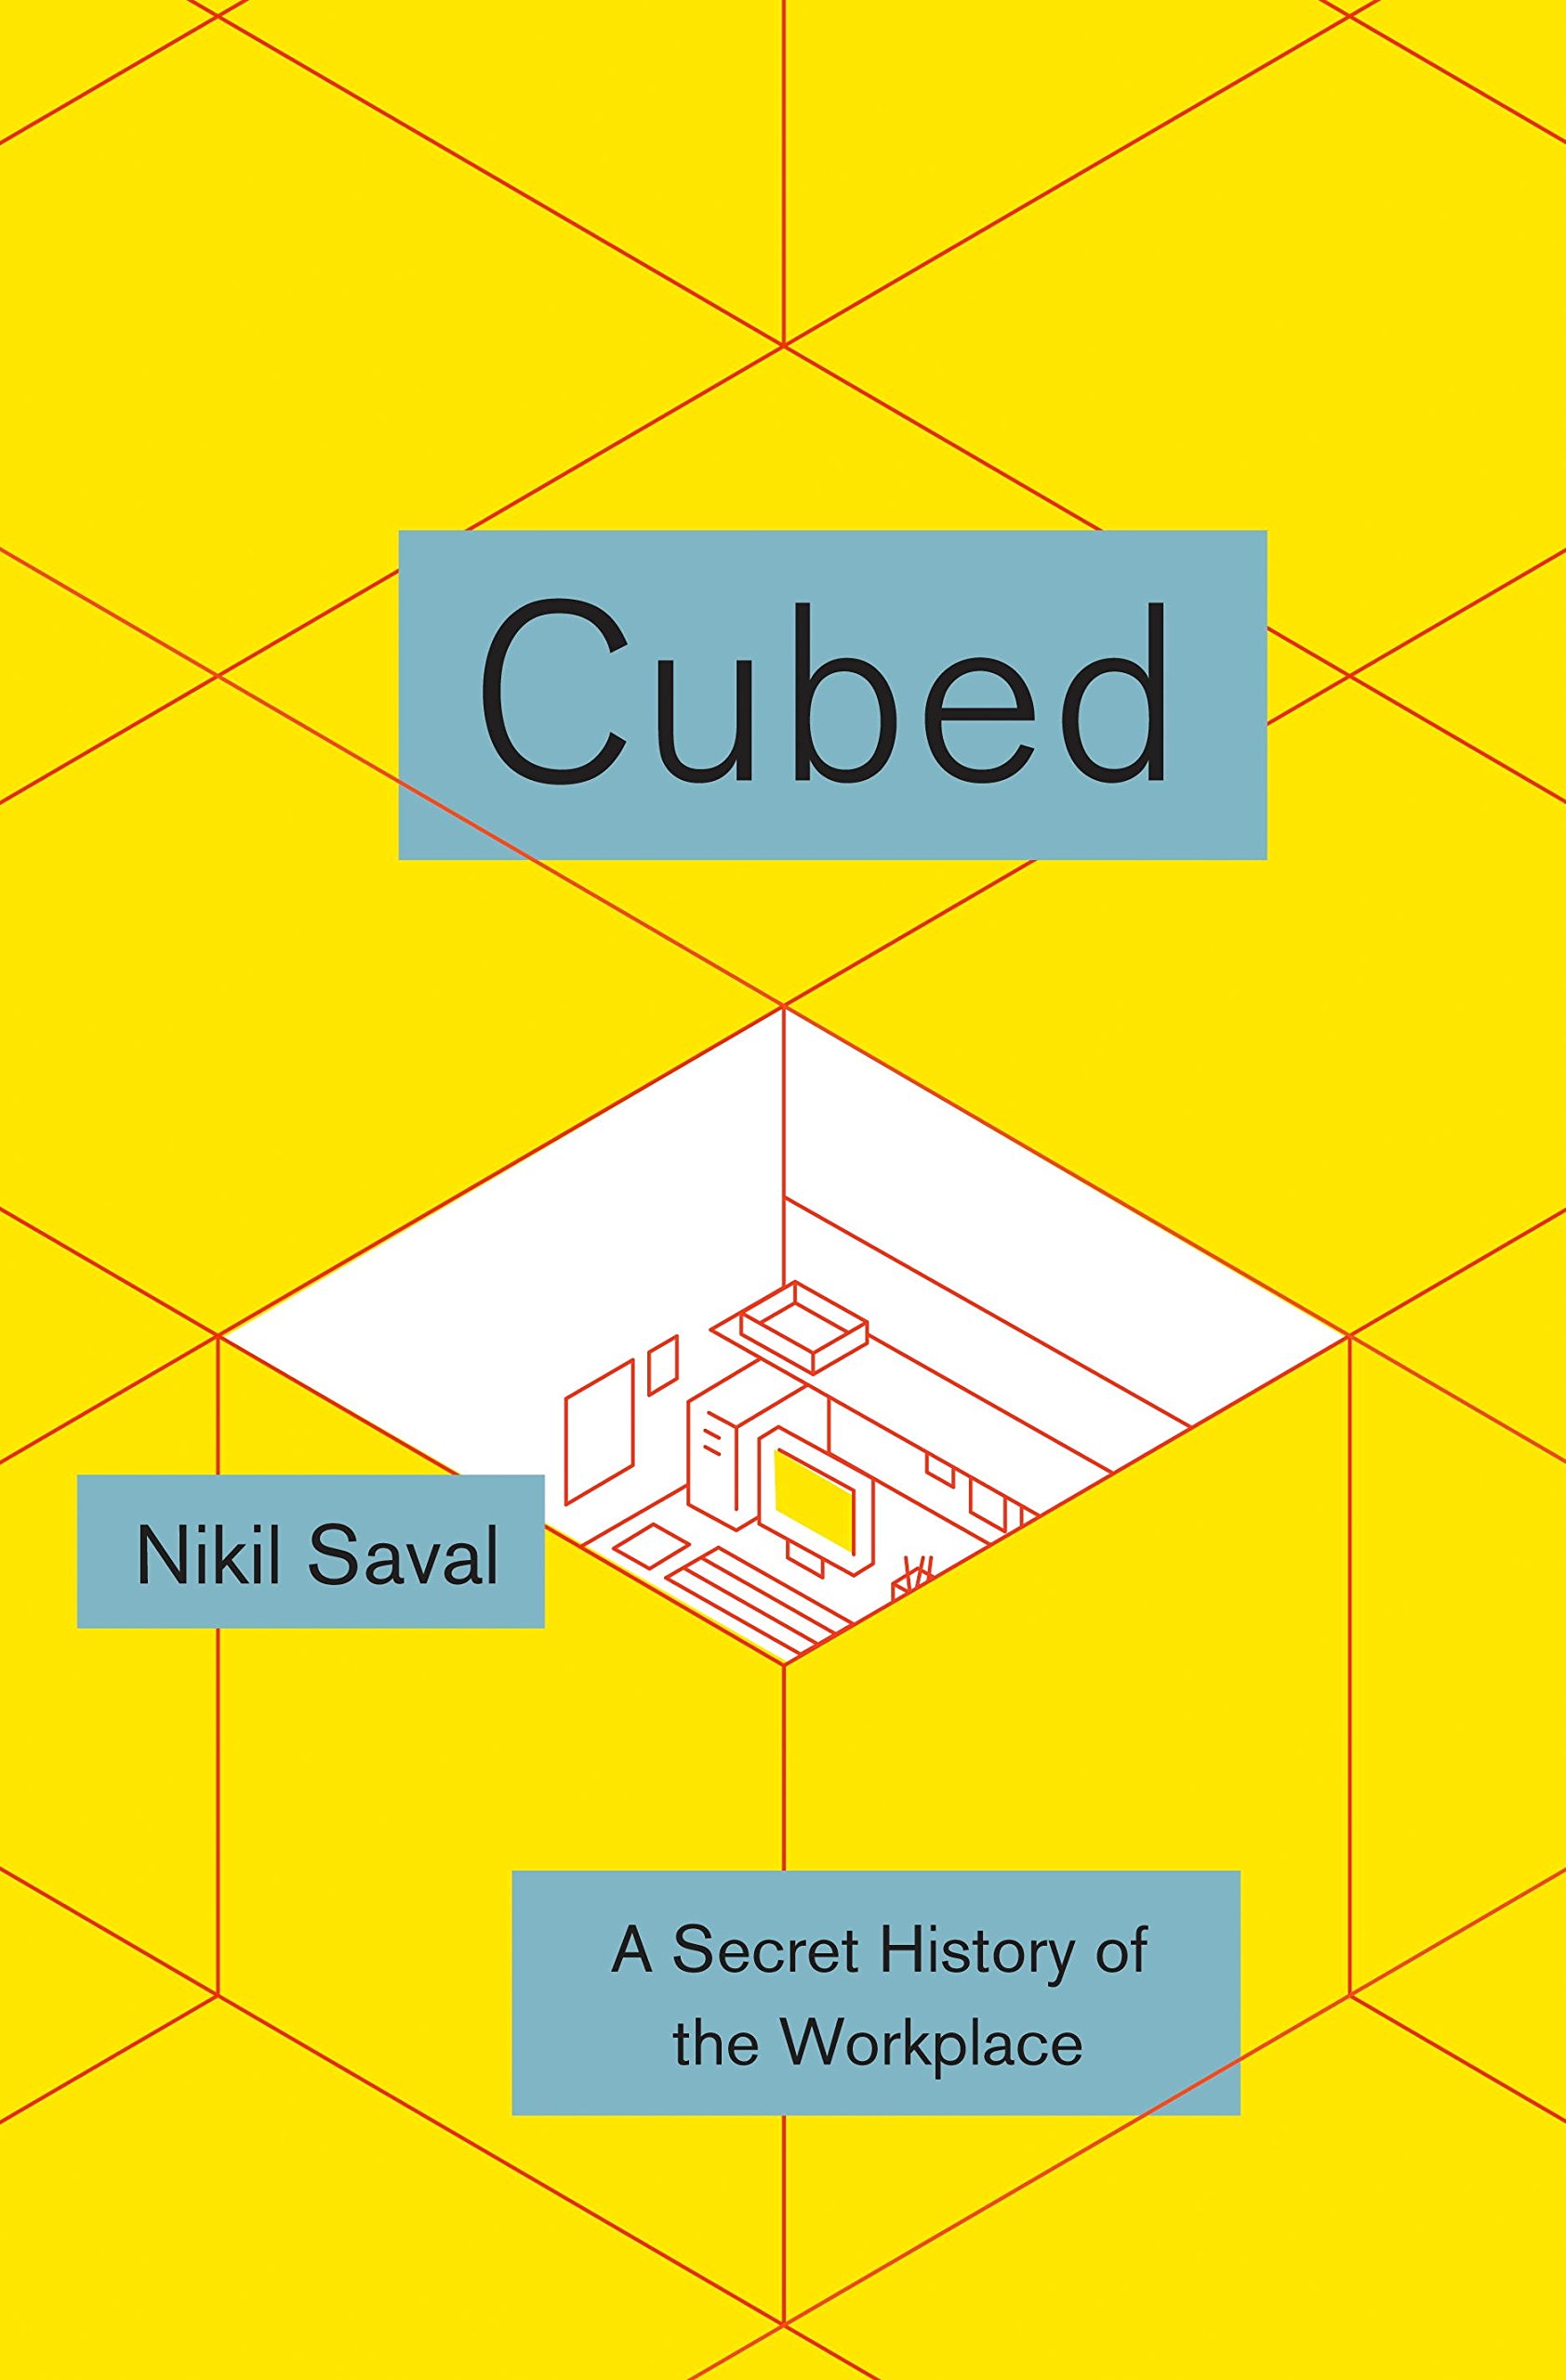 Amazon.com: Cubed: A Secret History of the Workplace (9780385536578 ...